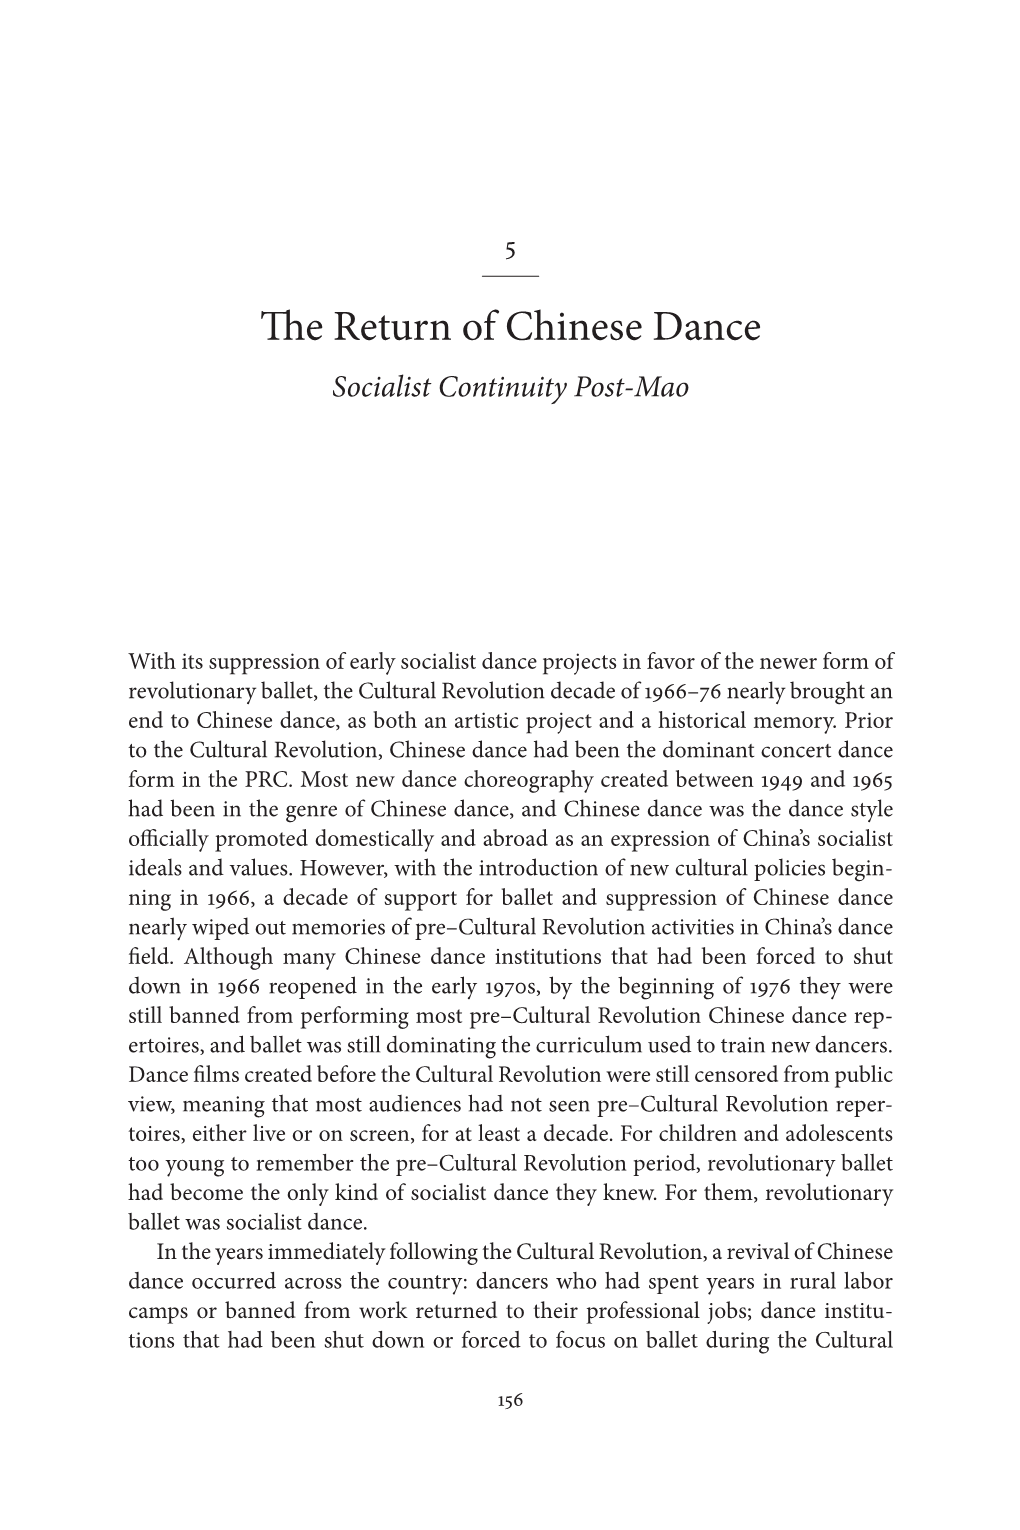 The Return of Chinese Dance Socialist Continuity Post-Mao